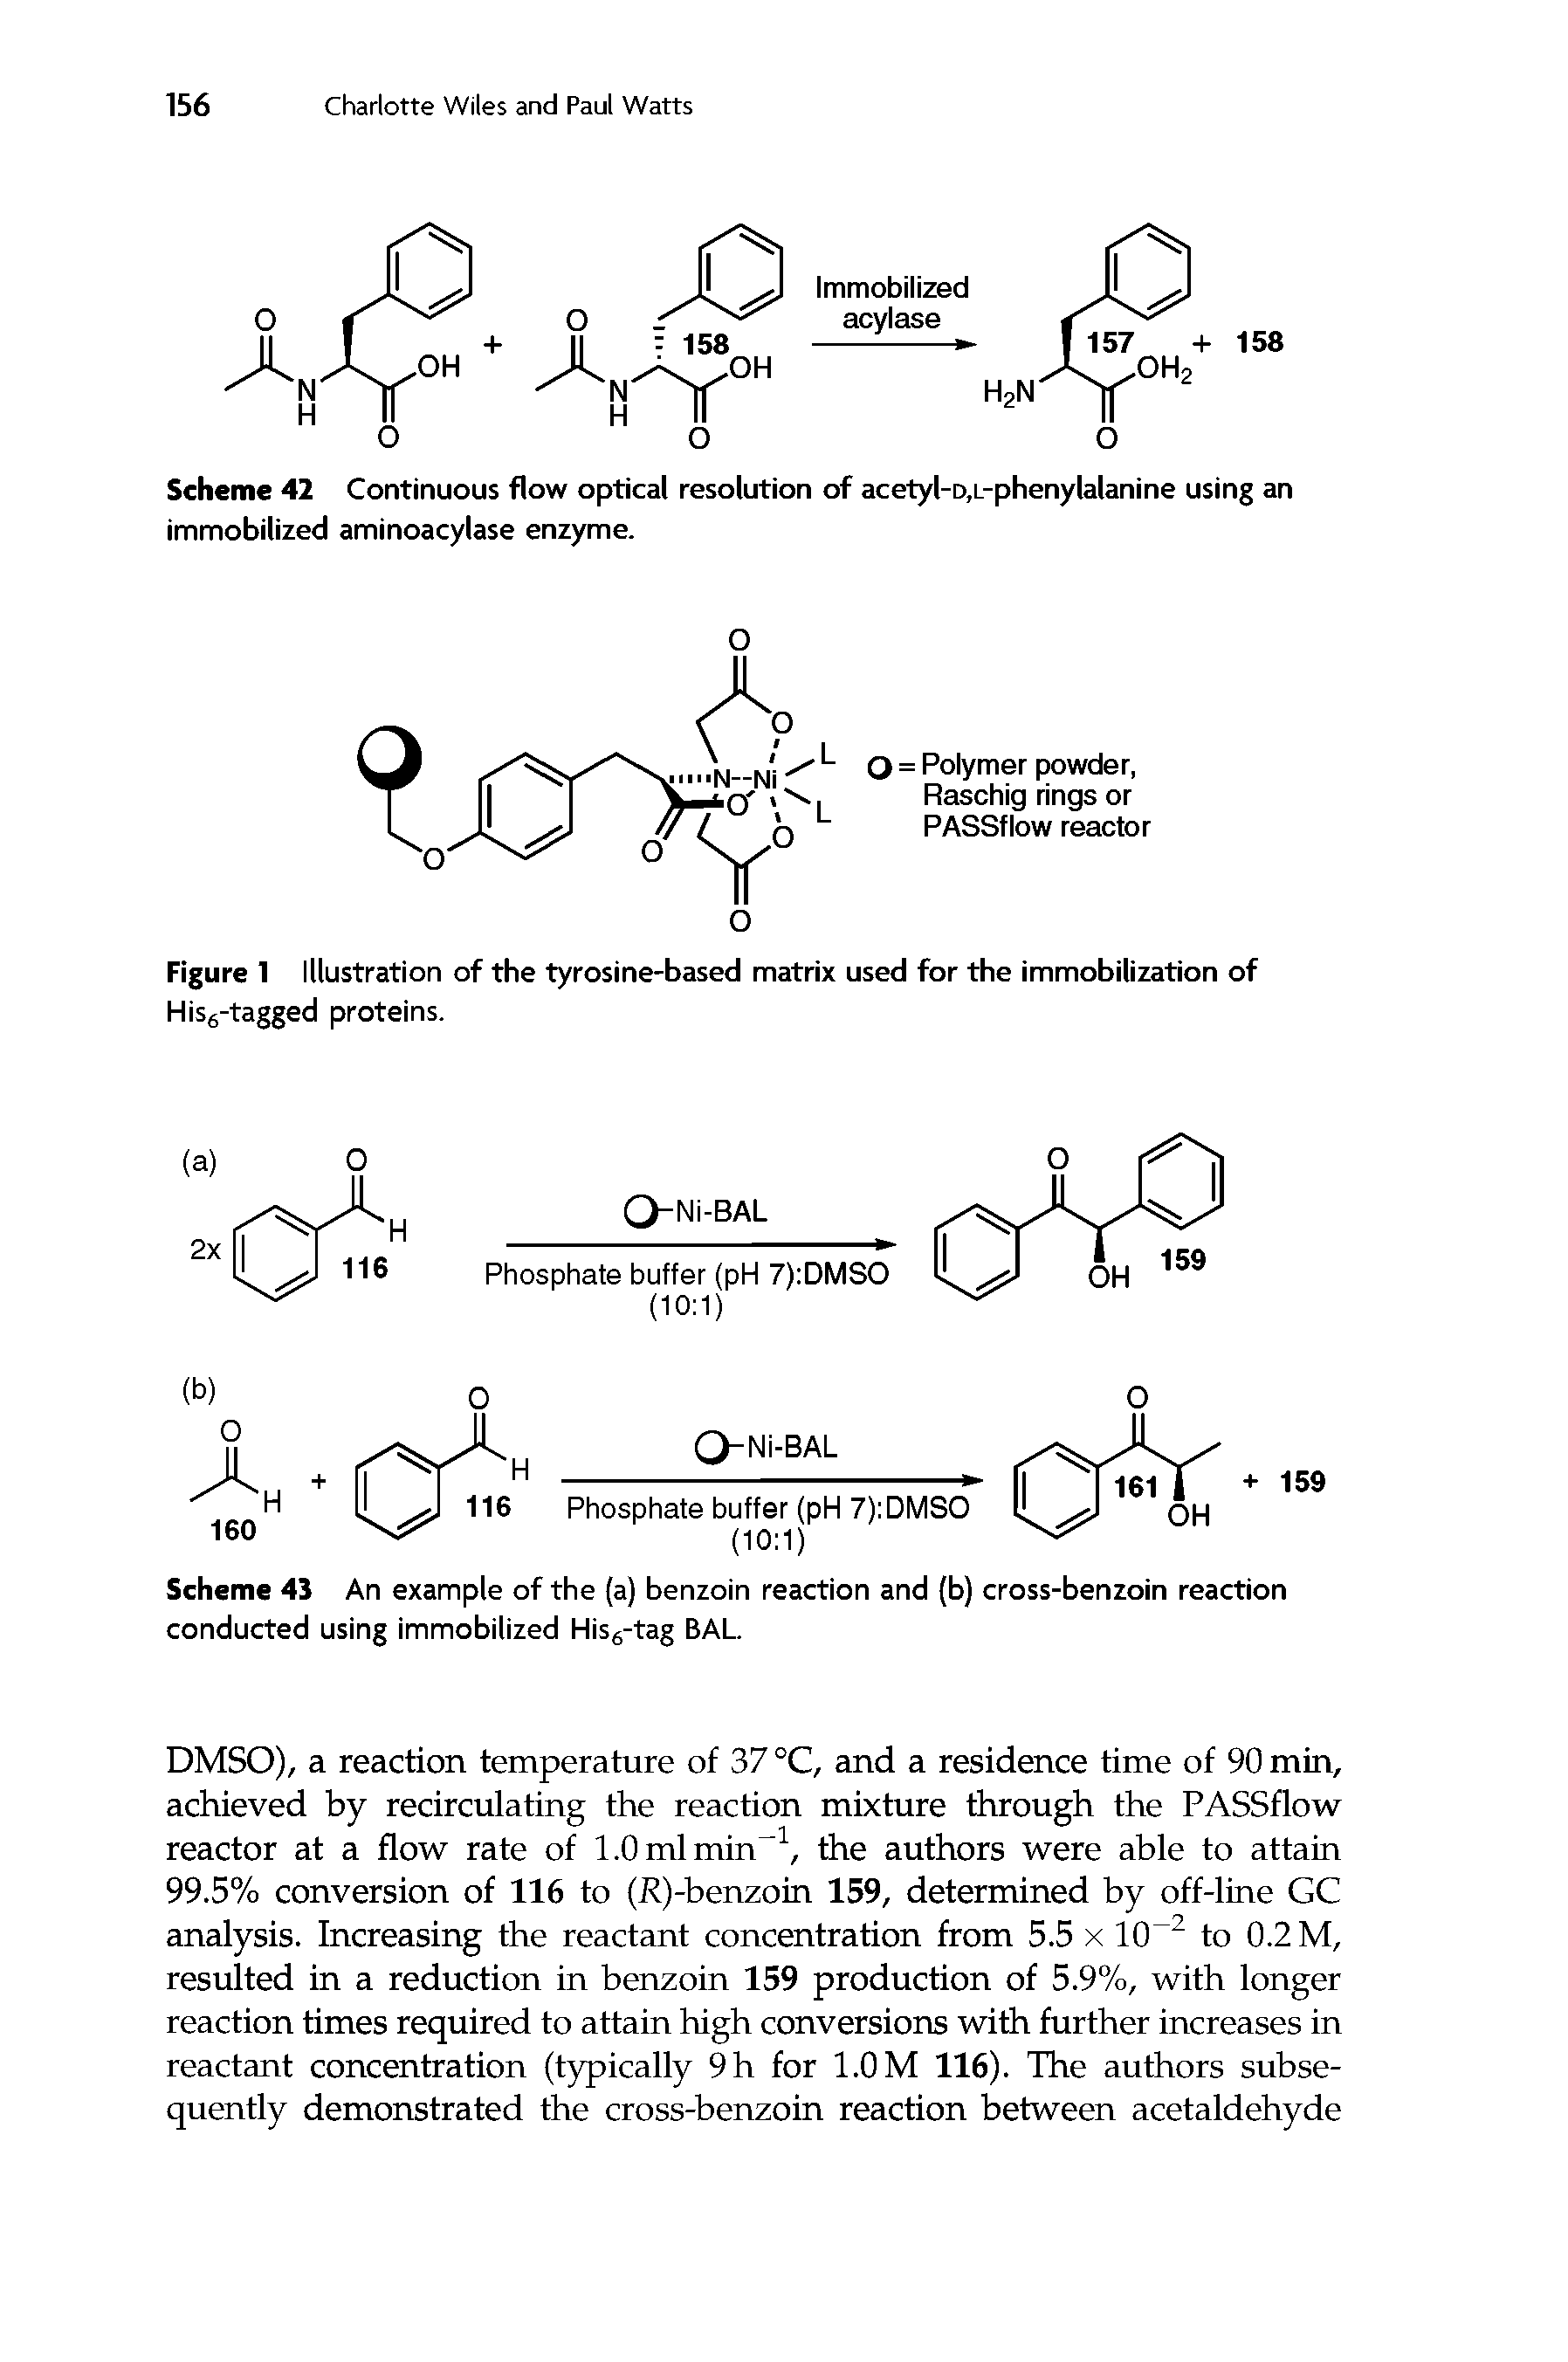 Scheme 43 An example of the (a) benzoin reaction and (b) cross-benzoin reaction conducted using immobilized His6-tag BAL.